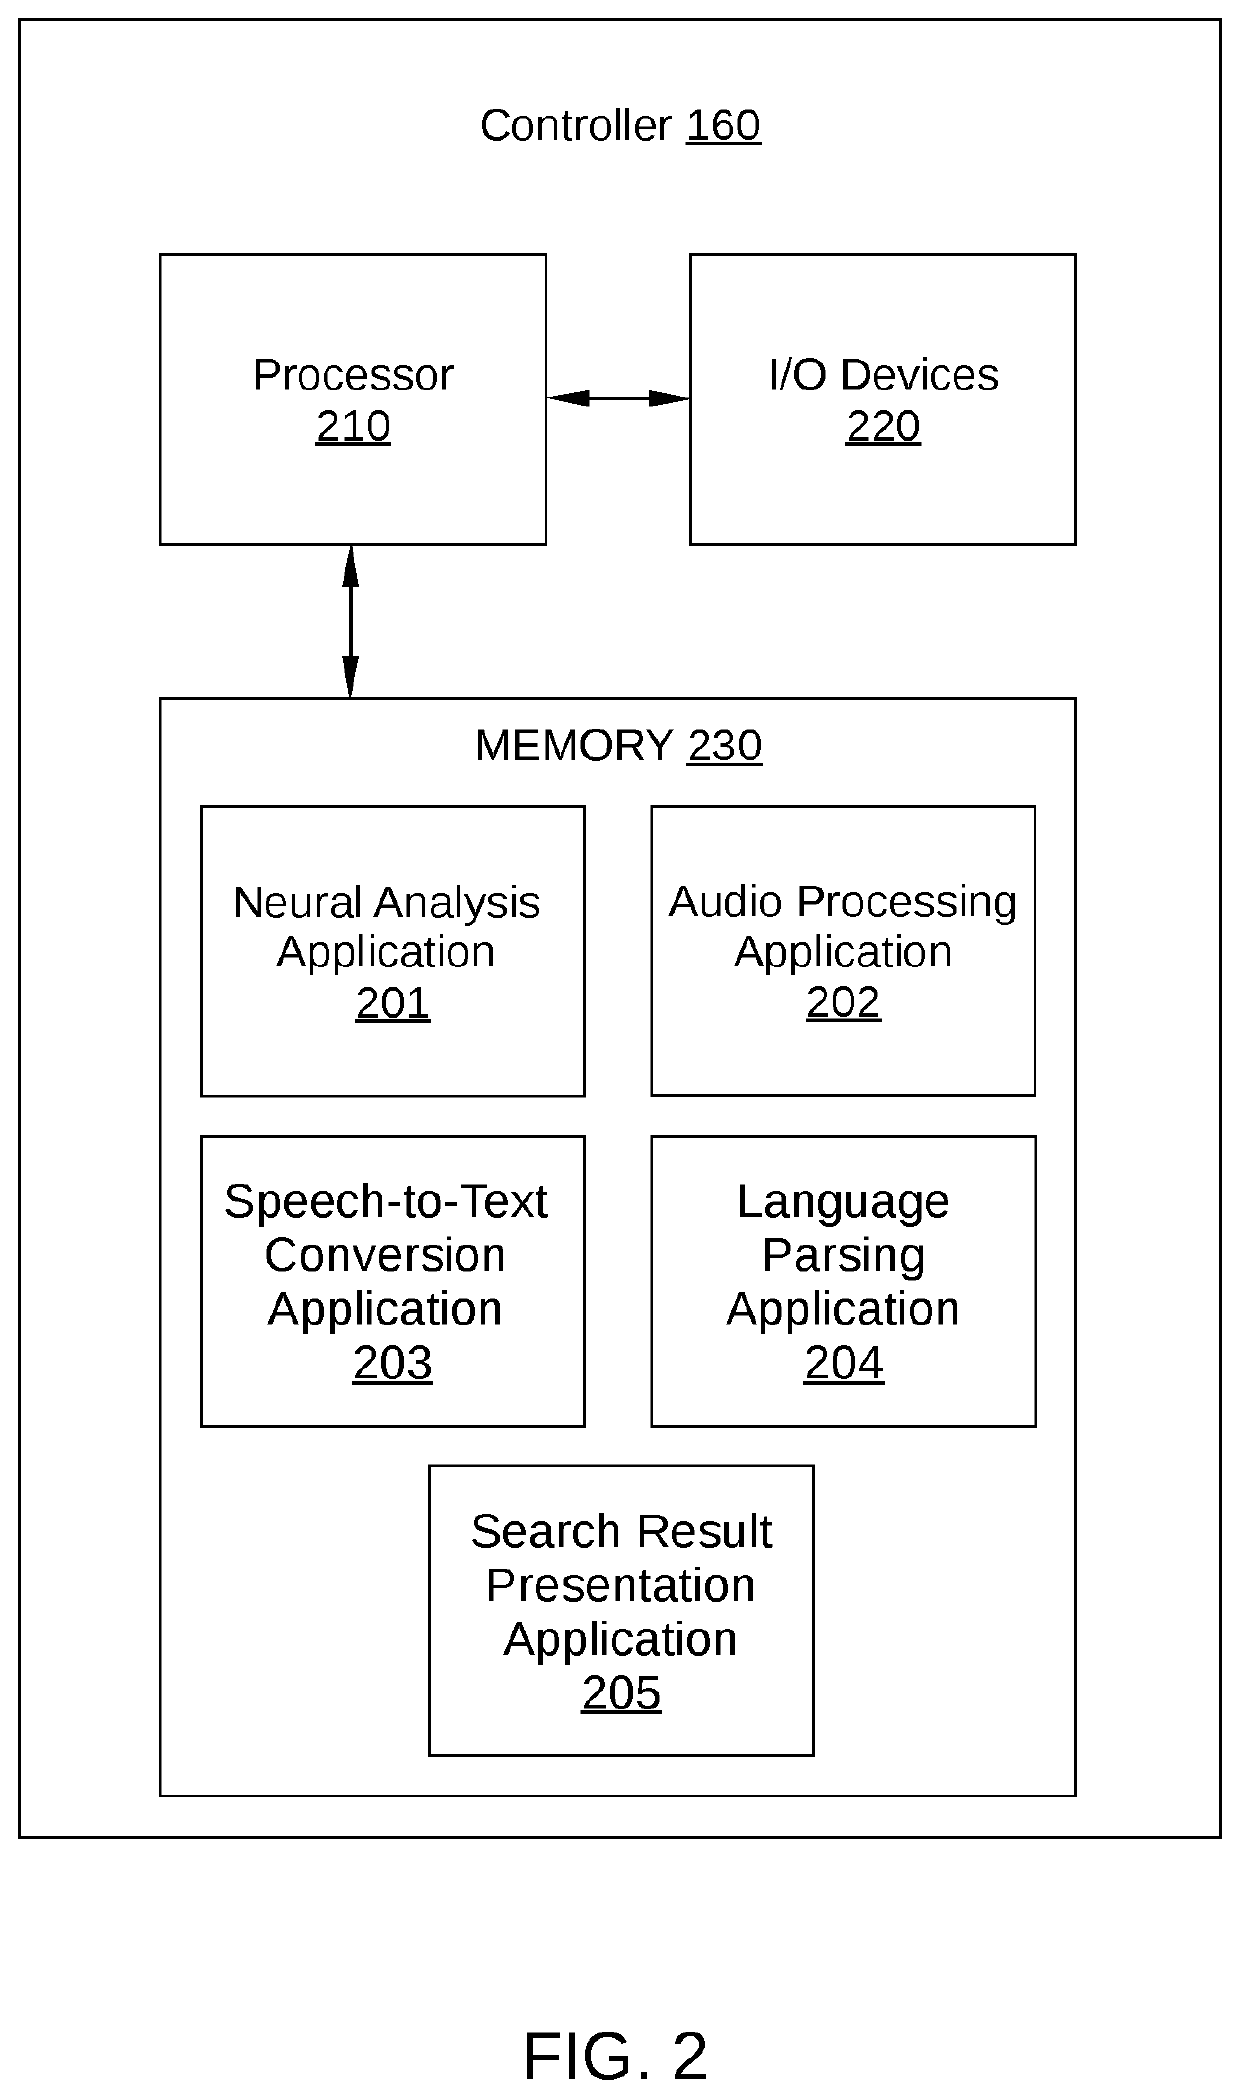 Retroactive information searching enabled by neural sensing